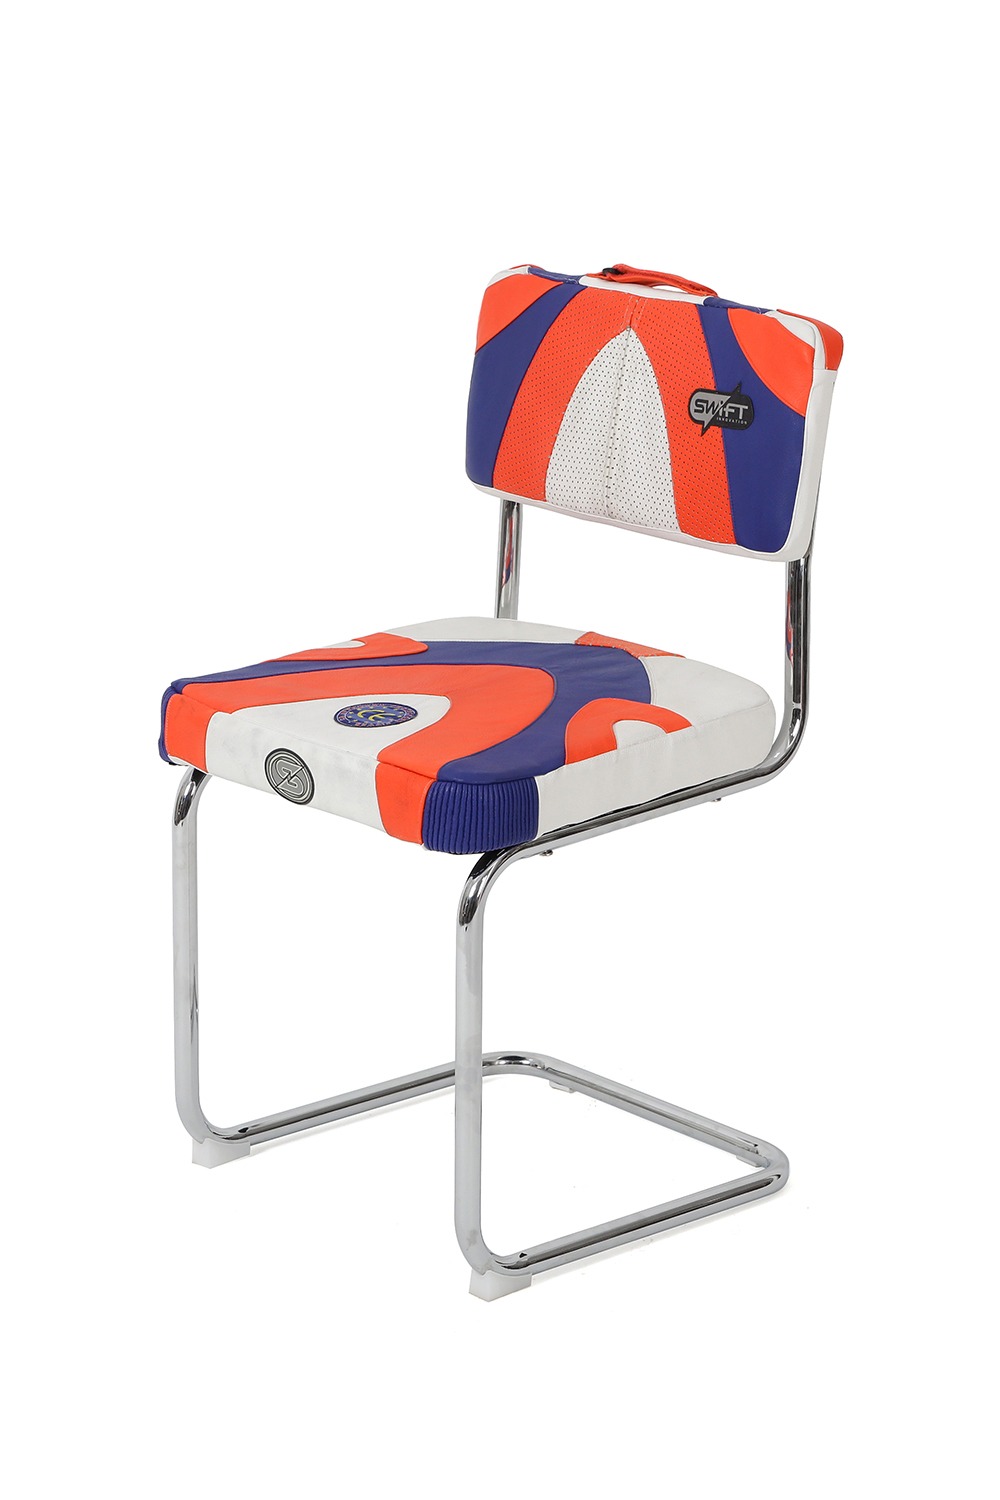 Chair C2 type 001 - Deconstructed SWIFT Racing Jacket Single Chair